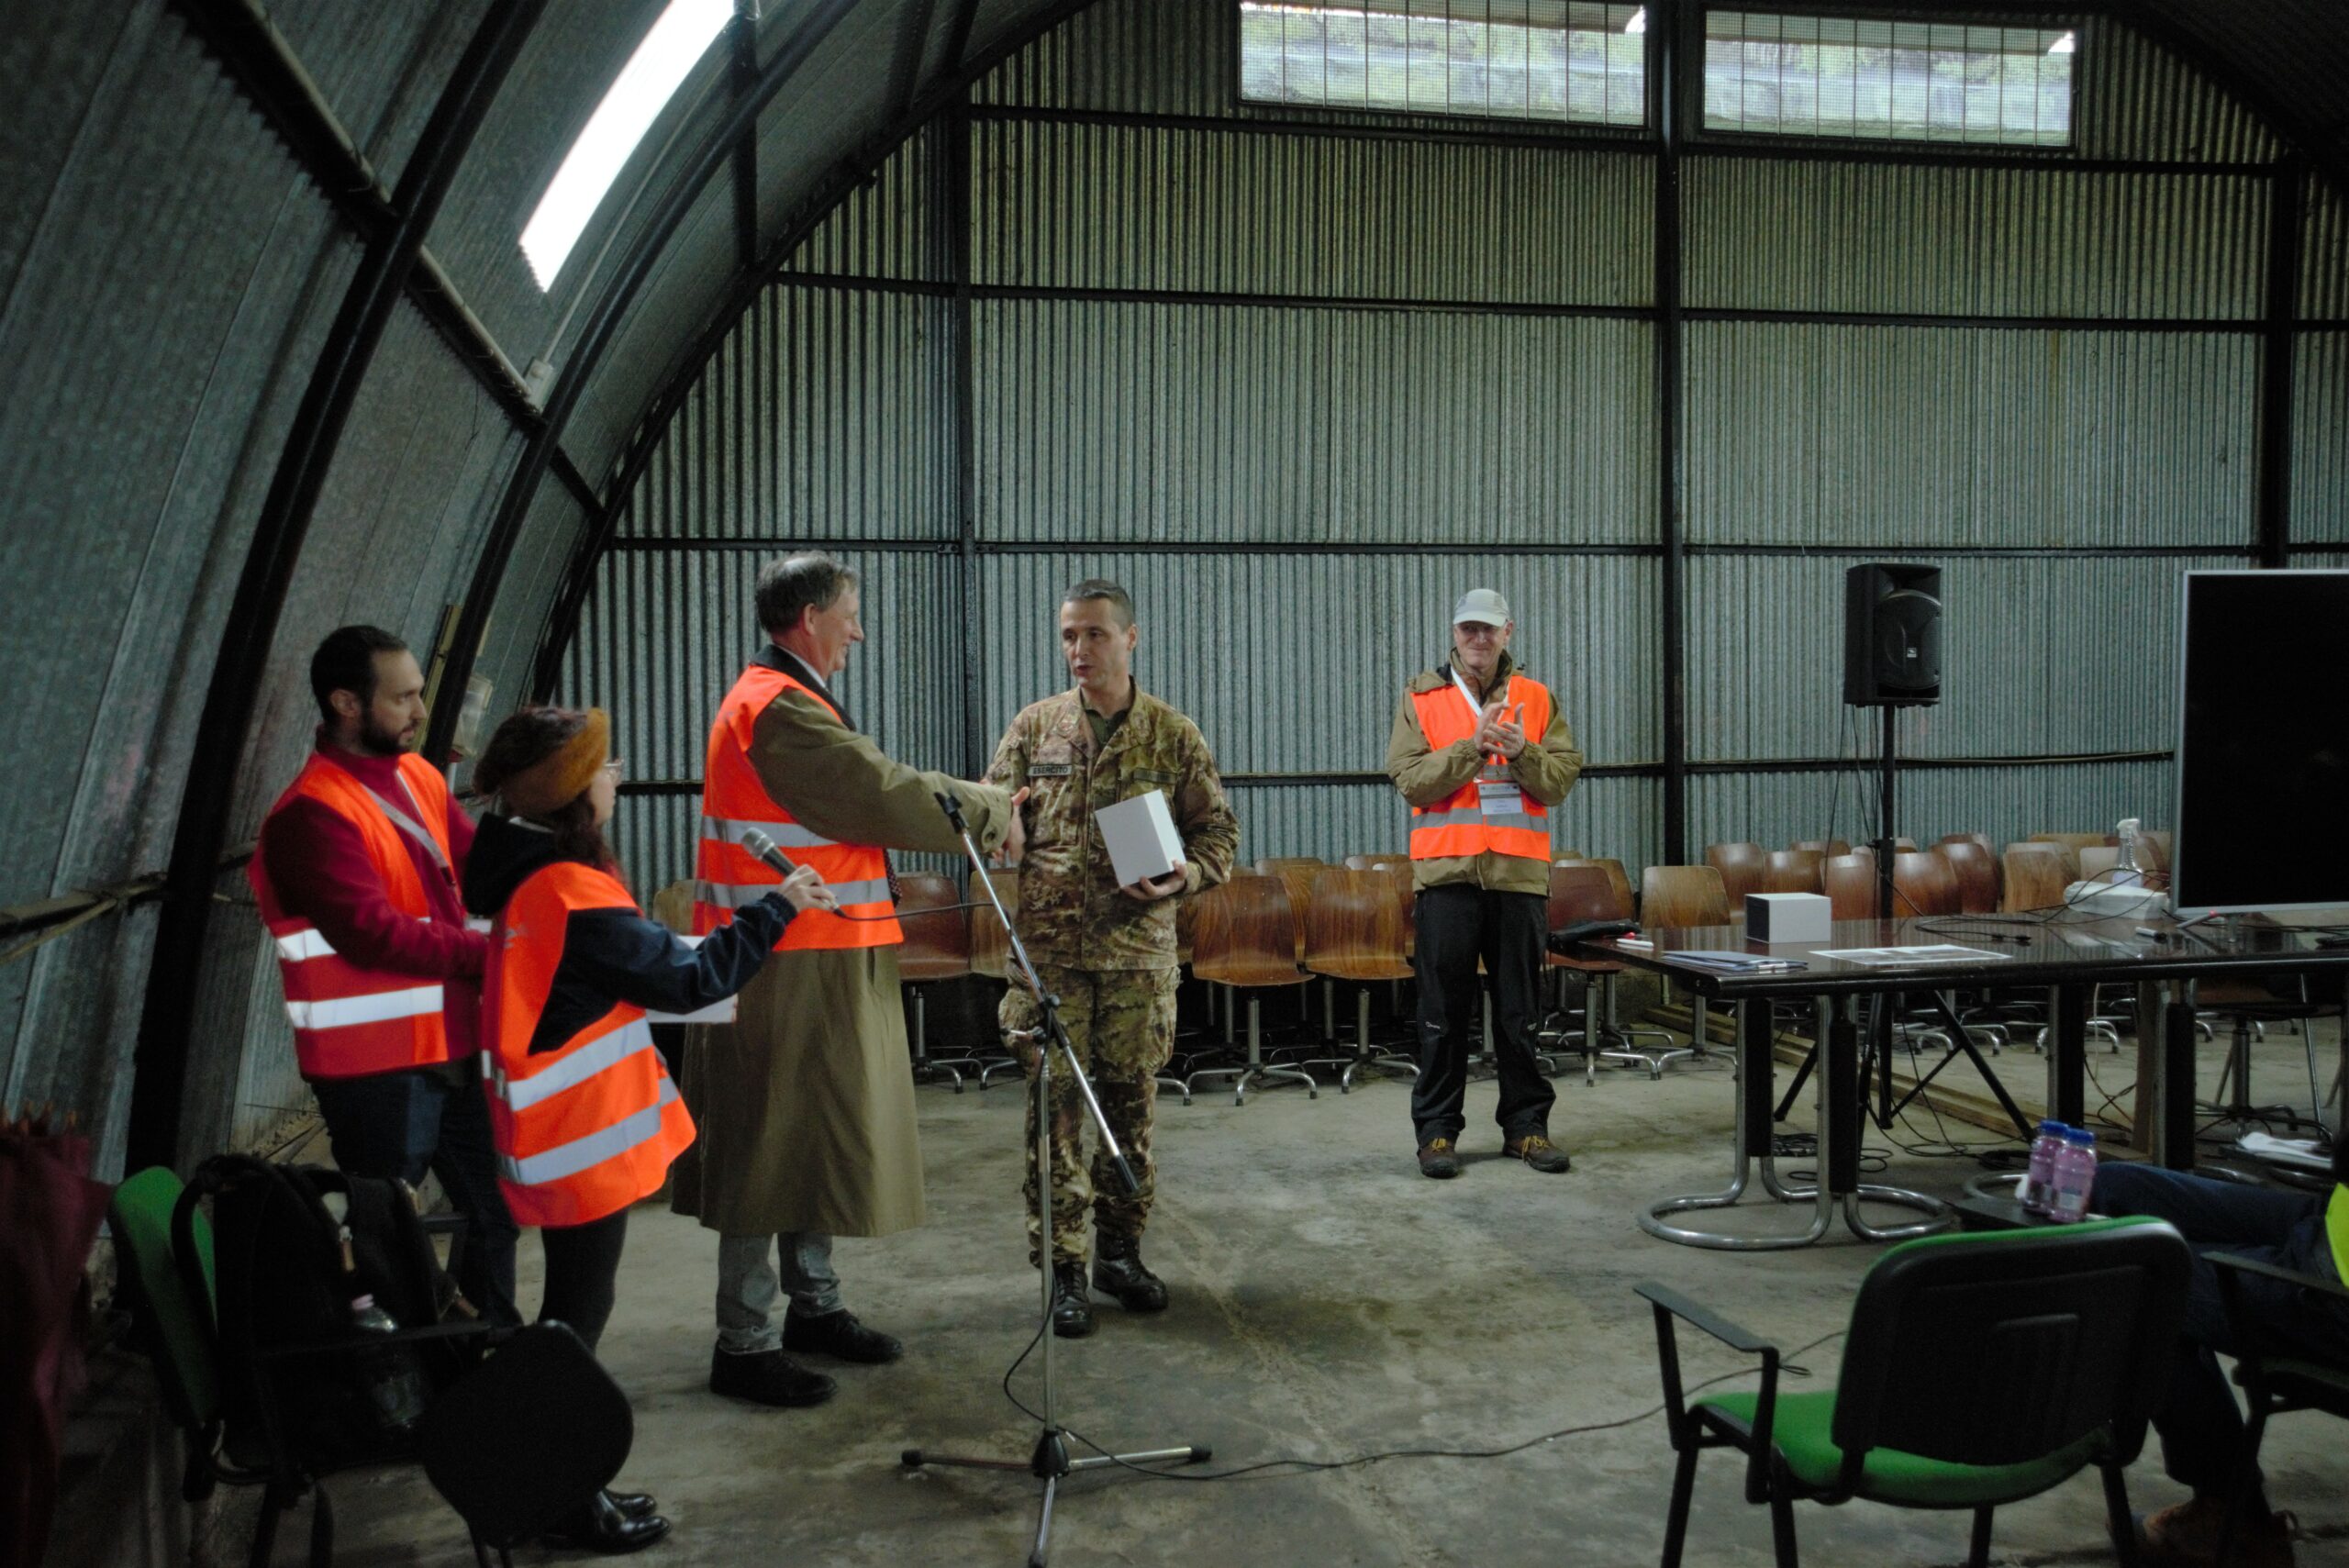 5 people standing in the front of a room. Four of them are wearing orange tabards and one of them is in army uniform. A man in orange tabard in the middle of the photo is shaking hands of a man in army uniform. Two people around them are applausing. A woman in orange tabard is holding a microphone.